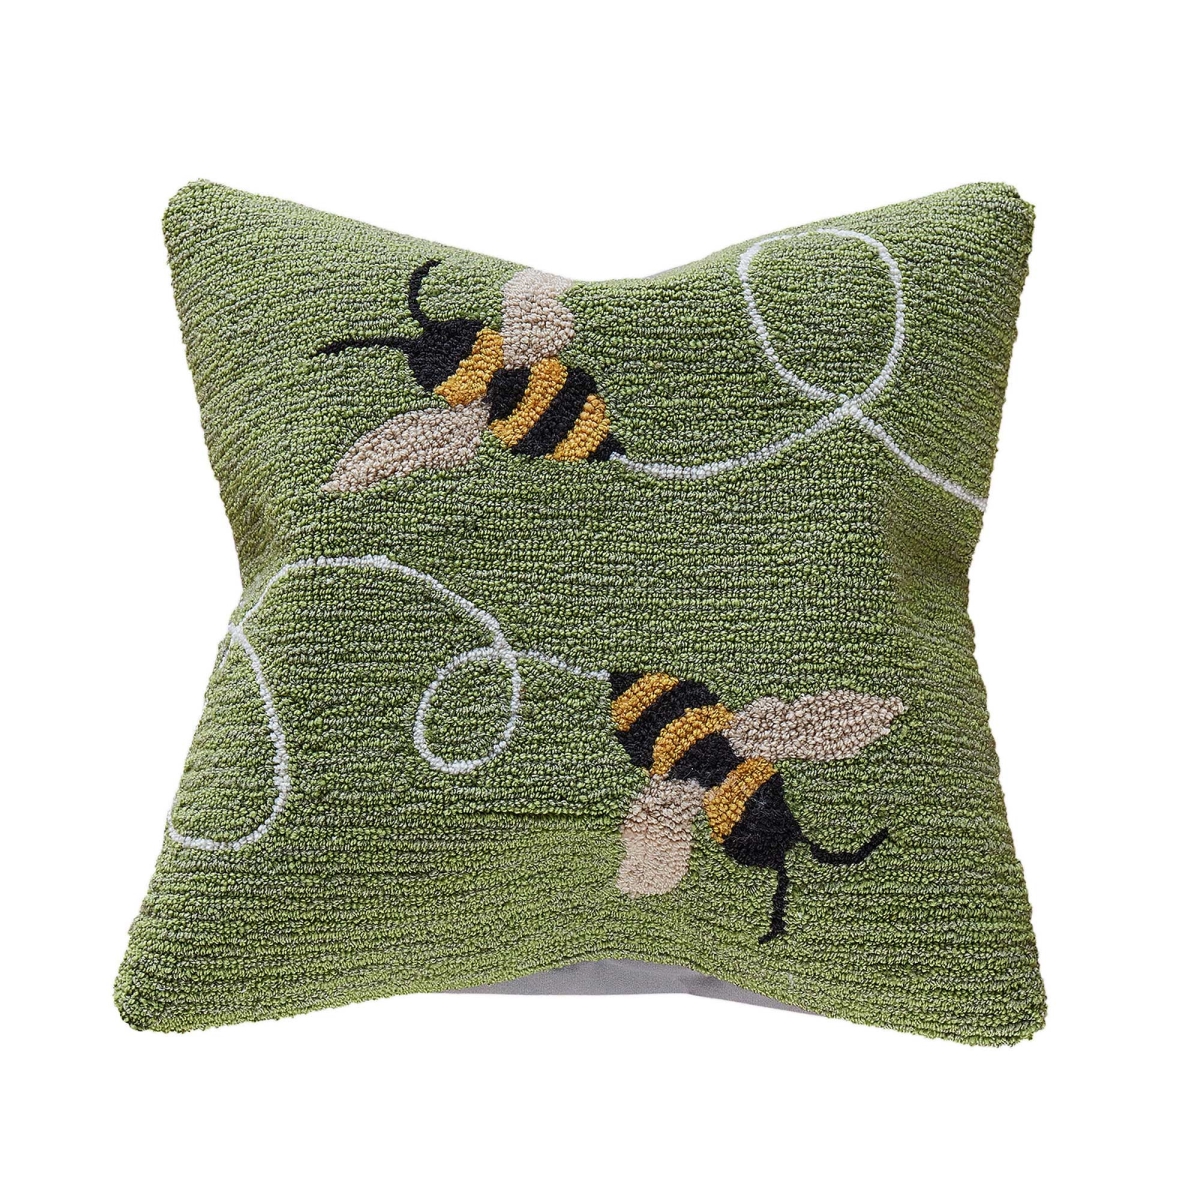 Trans-ocean Imports 7fp8s443706 18 In. Square Liora Manne Frontporch Buzzy Bees Indoor & Outdoor Hand Tufted Square Pillow - Green